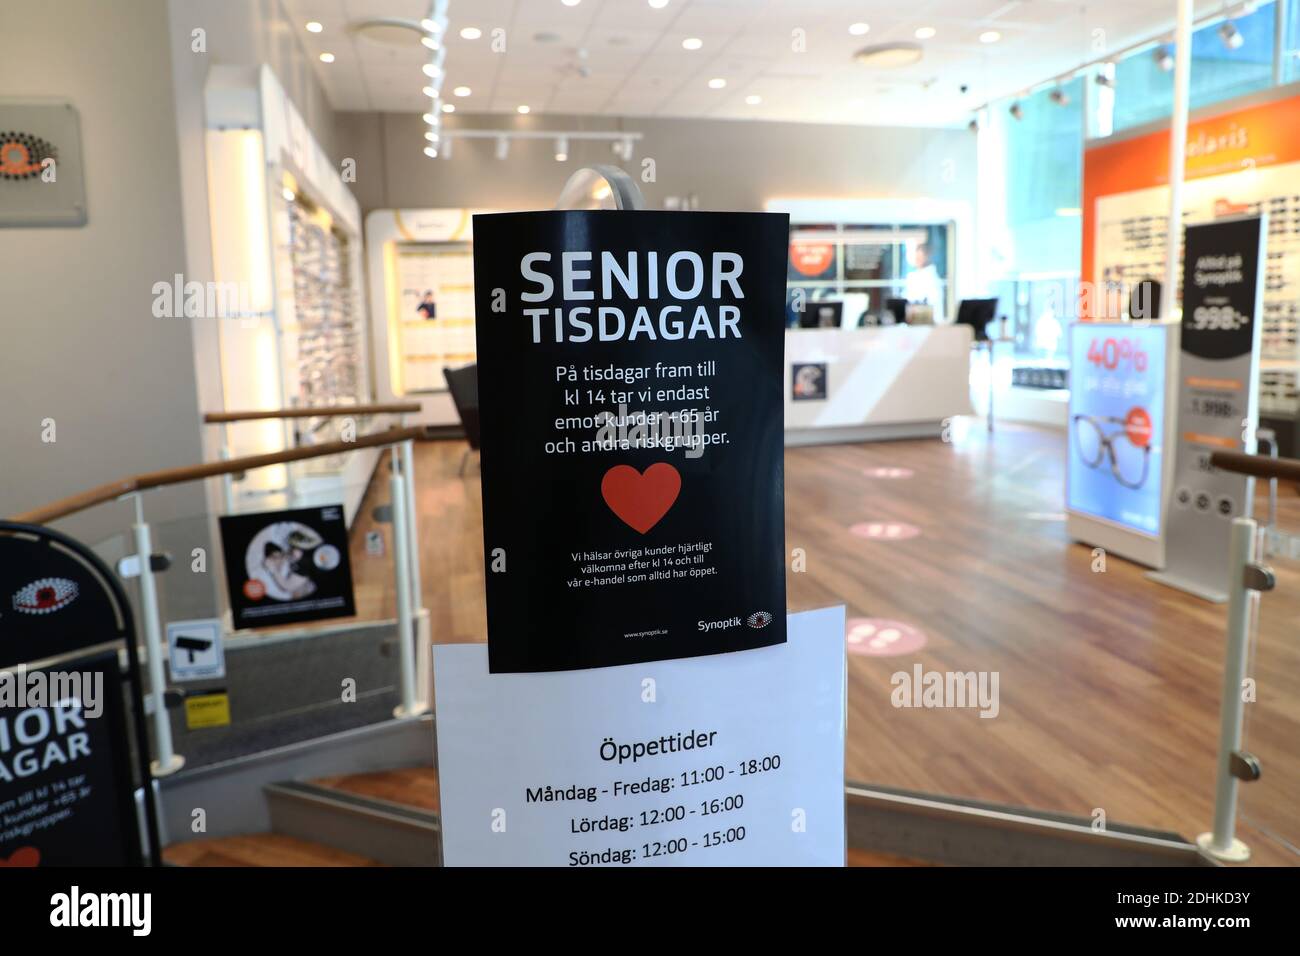 NORRKÖPING, SWEDEN- 22 APRIL 2020: Corona sign / information during the corona crisis. Information that seniors are welcome on a particular day at an optician. Photo Jeppe Gustafsson Stock Photo